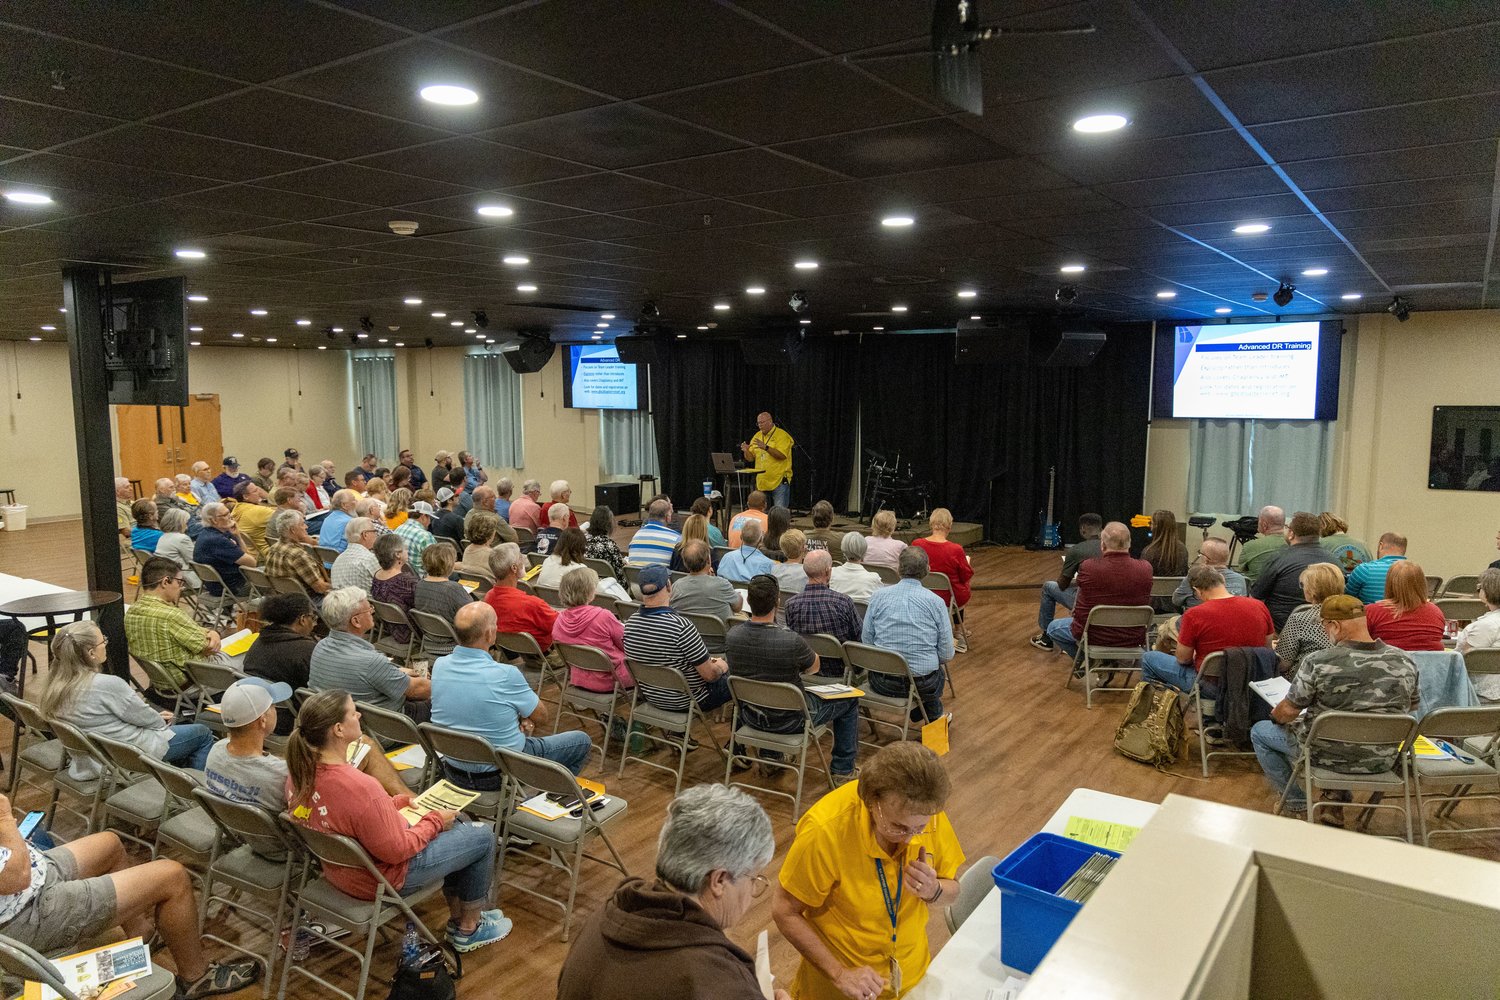 Volunteers fill a room for Disaster Relief training in Swainsboro, Ga.